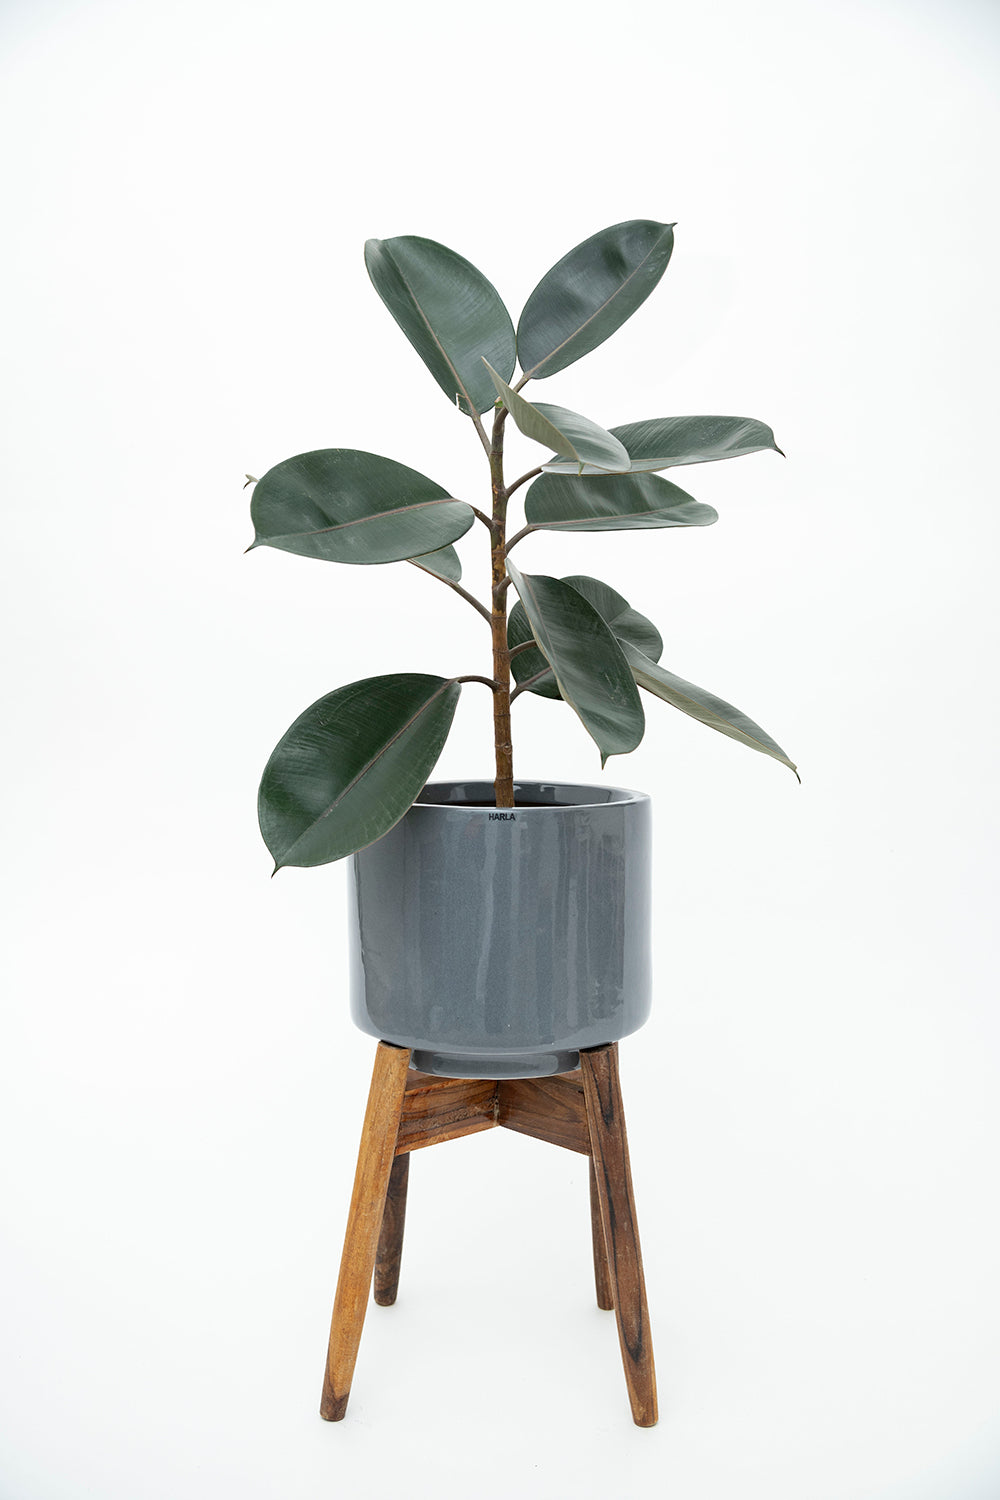 Grey color Medium Size Crimson Sky Ceramic Planter along with Wooden Stand and Rubber Plant in it.